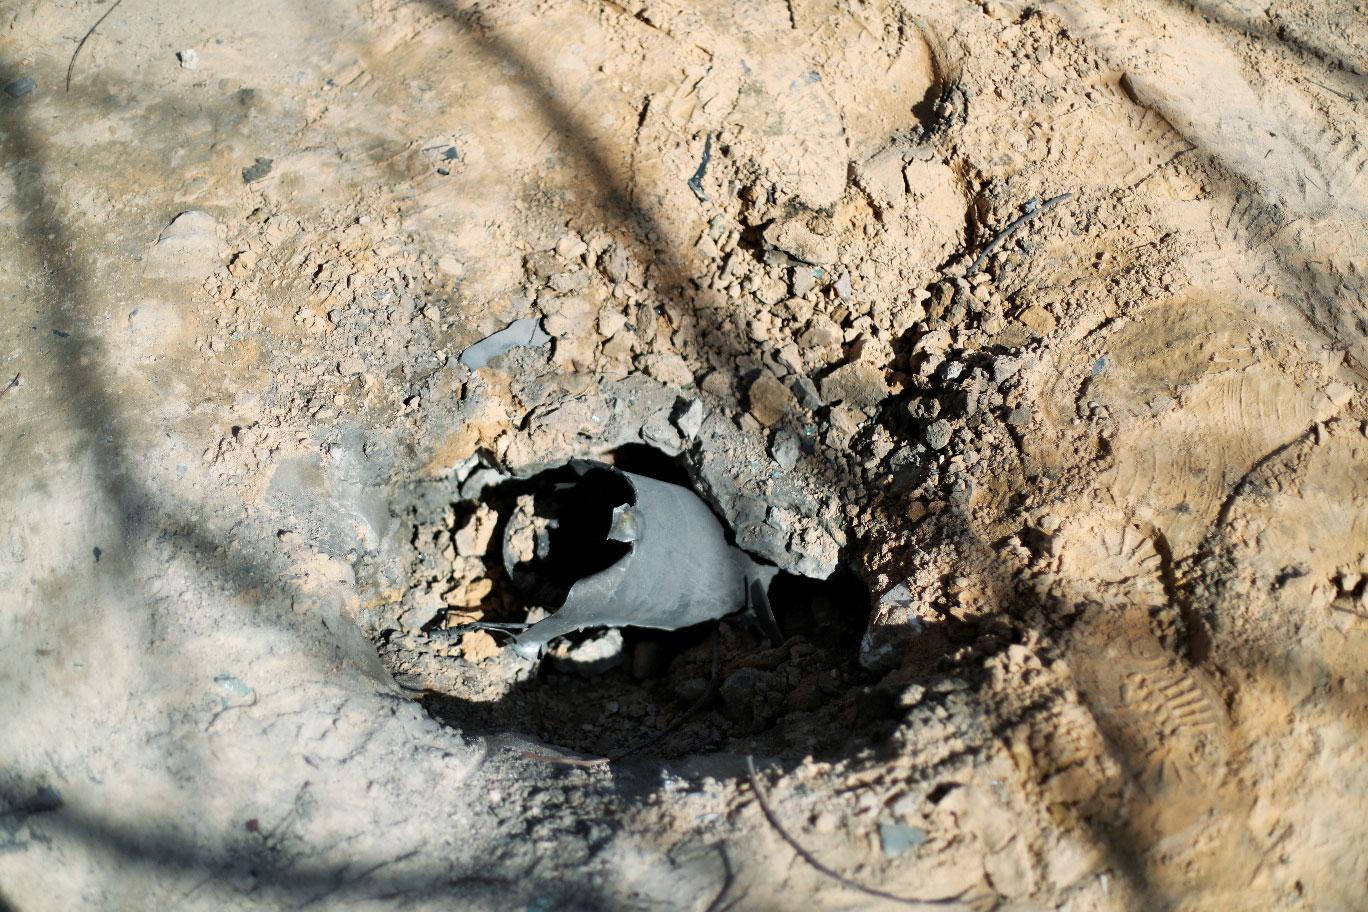 A hole made by an exploded missile is seen in Abu Salim district in Tripoli, Libya